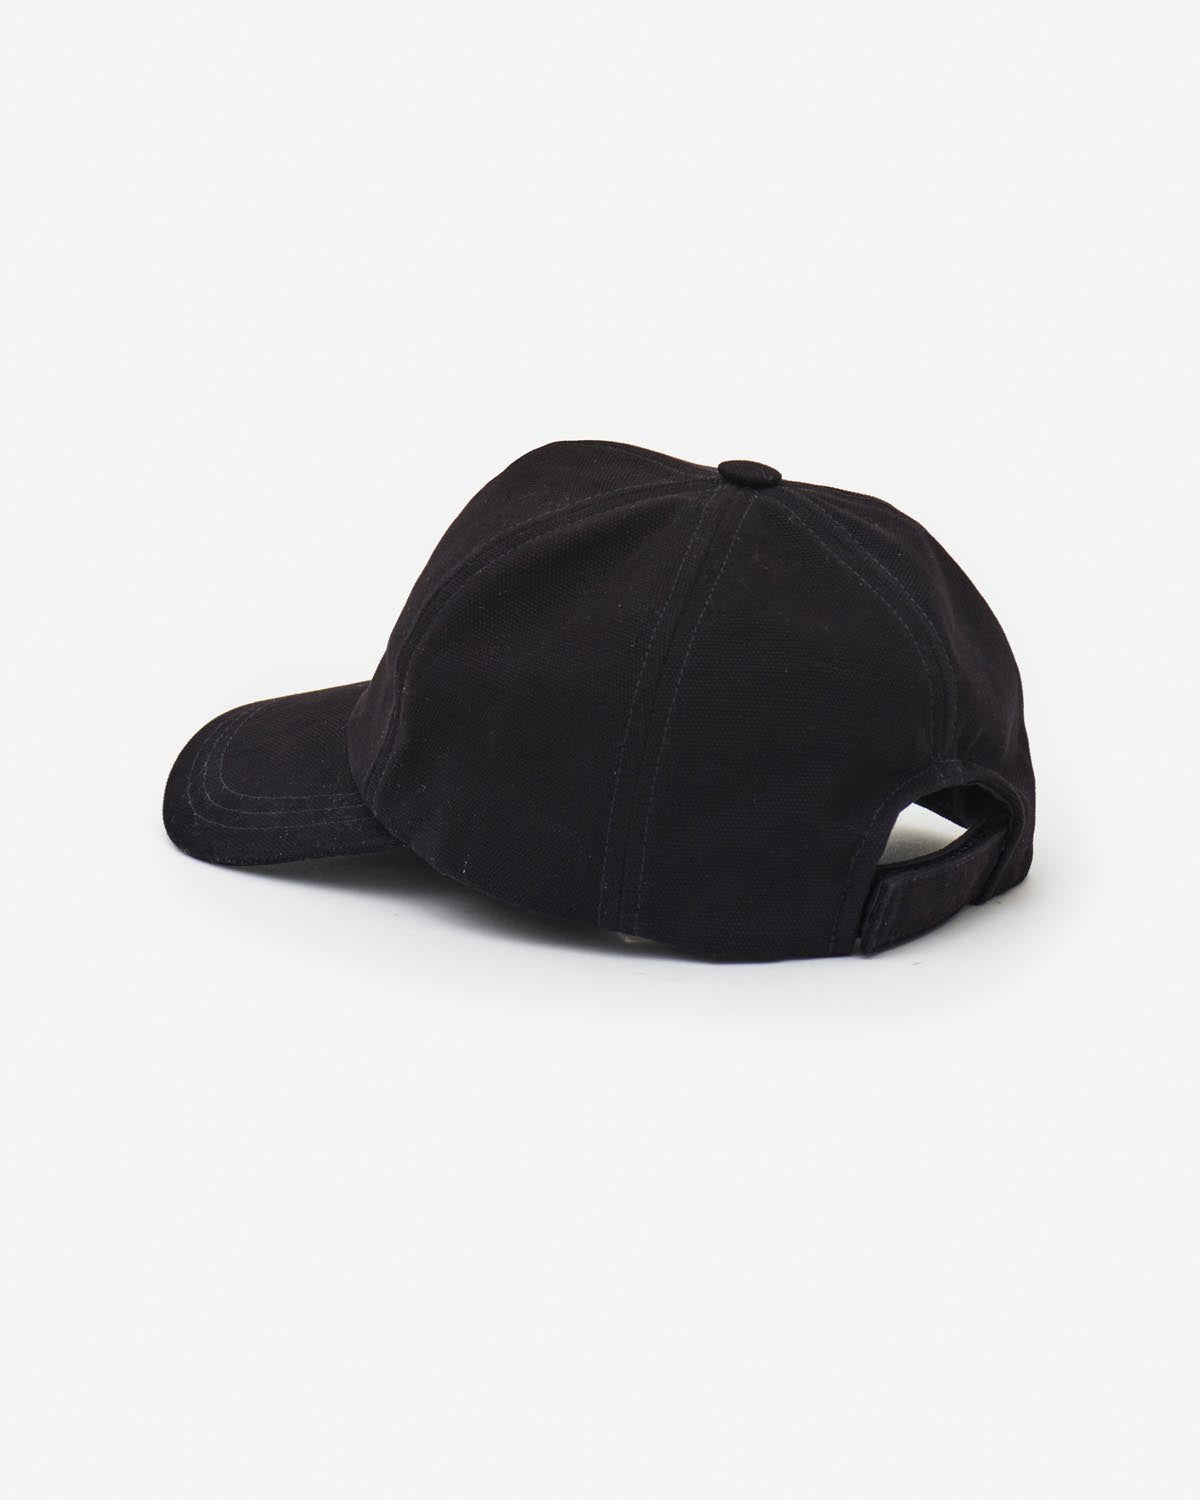 Hats Woman and Man | ISABEL MARANT Official Online Store